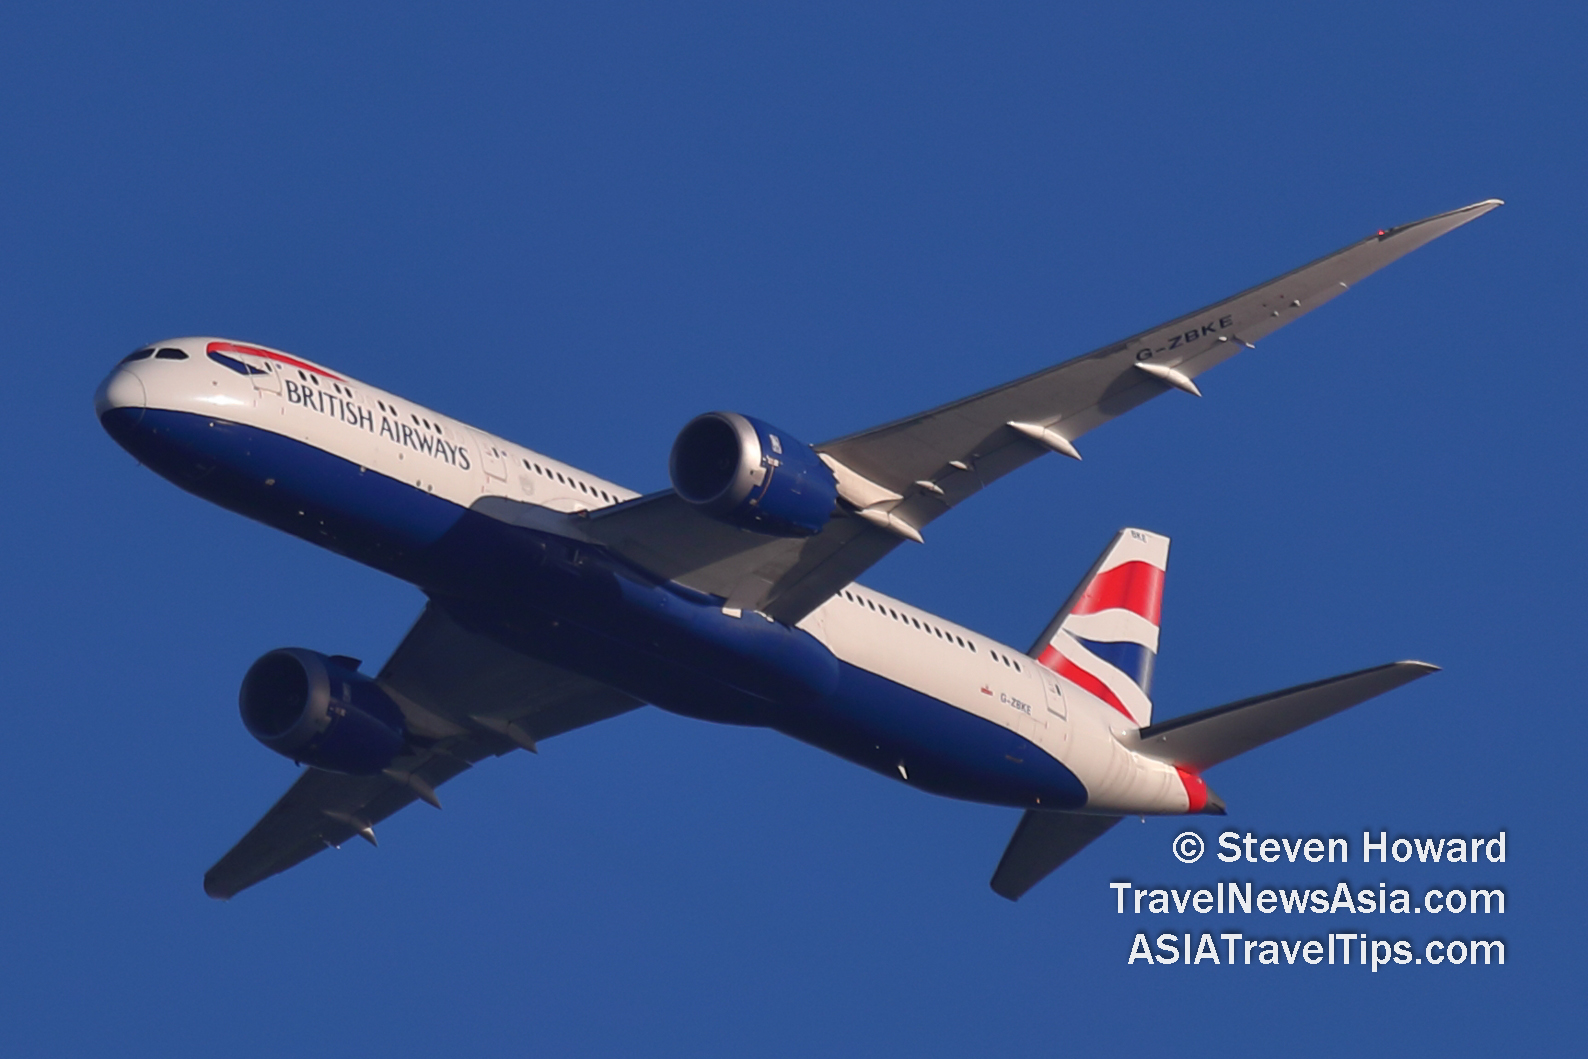 British Airways Boeing 787-9 reg: G-ZBKE. Picture by Steven Howard of TravelNewsAsia.com Click to enlarge.